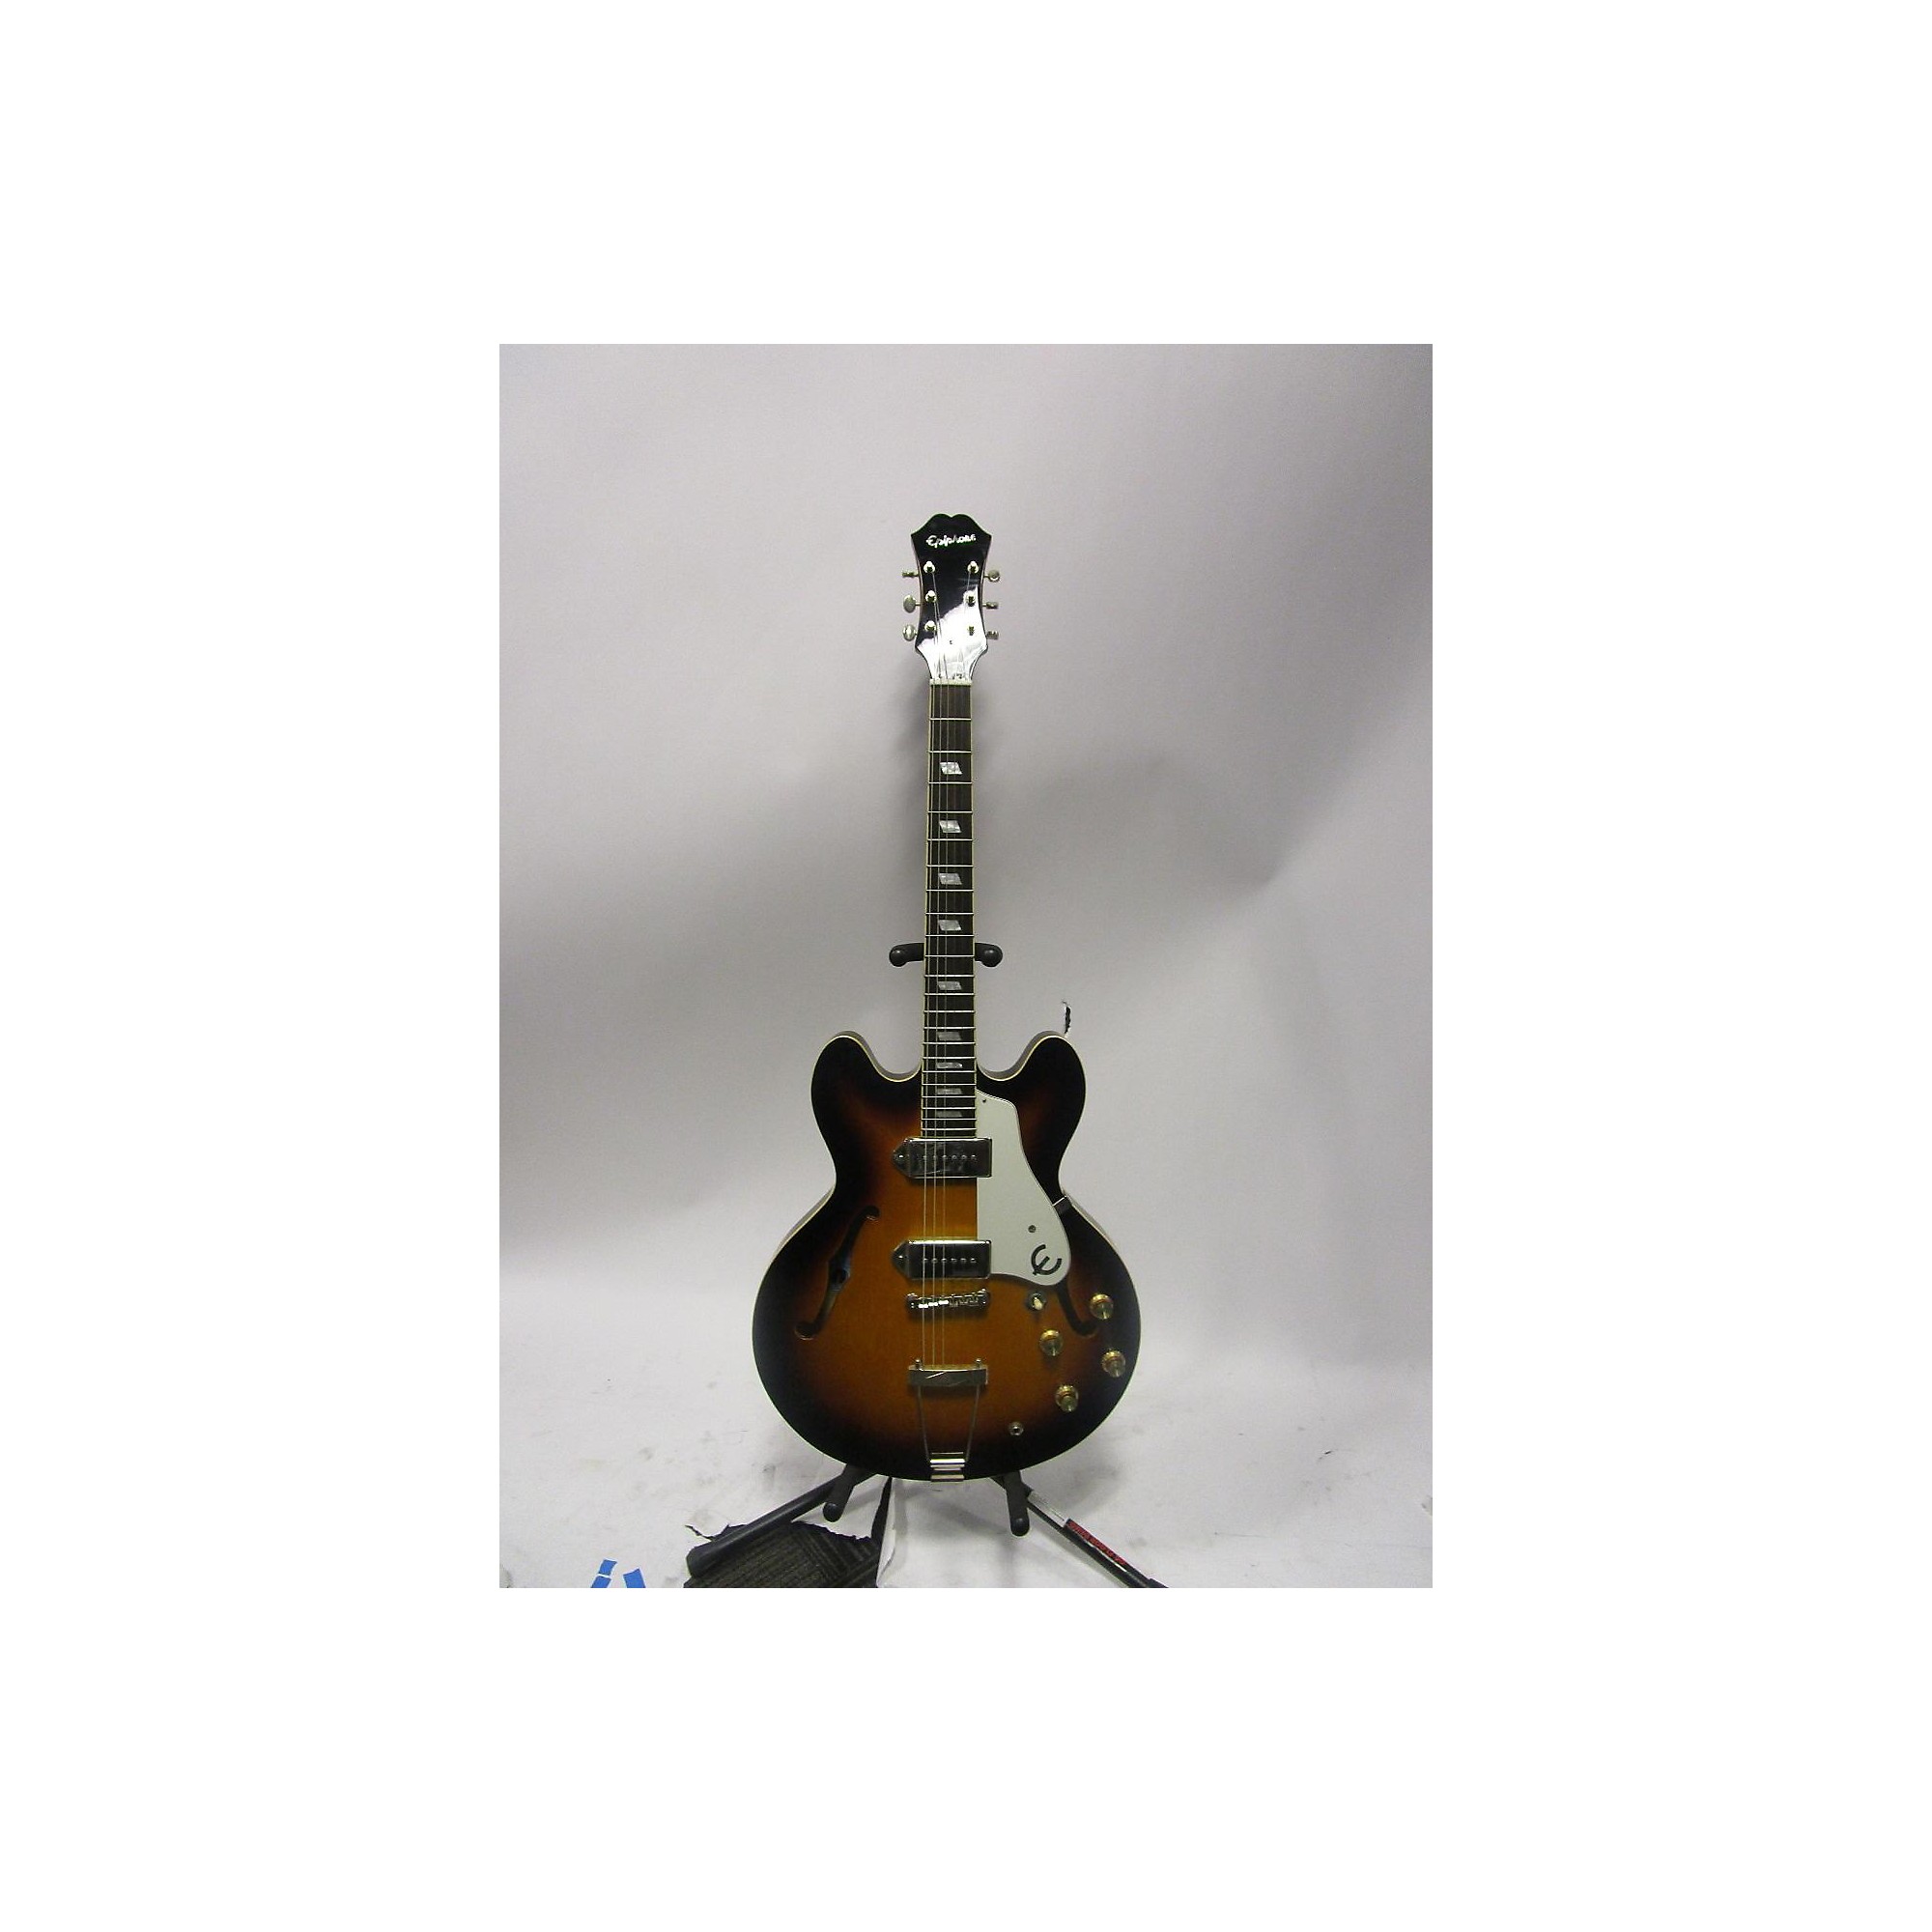 Used Epiphone Inspired By John Lennon Casino Hollow Body Electric